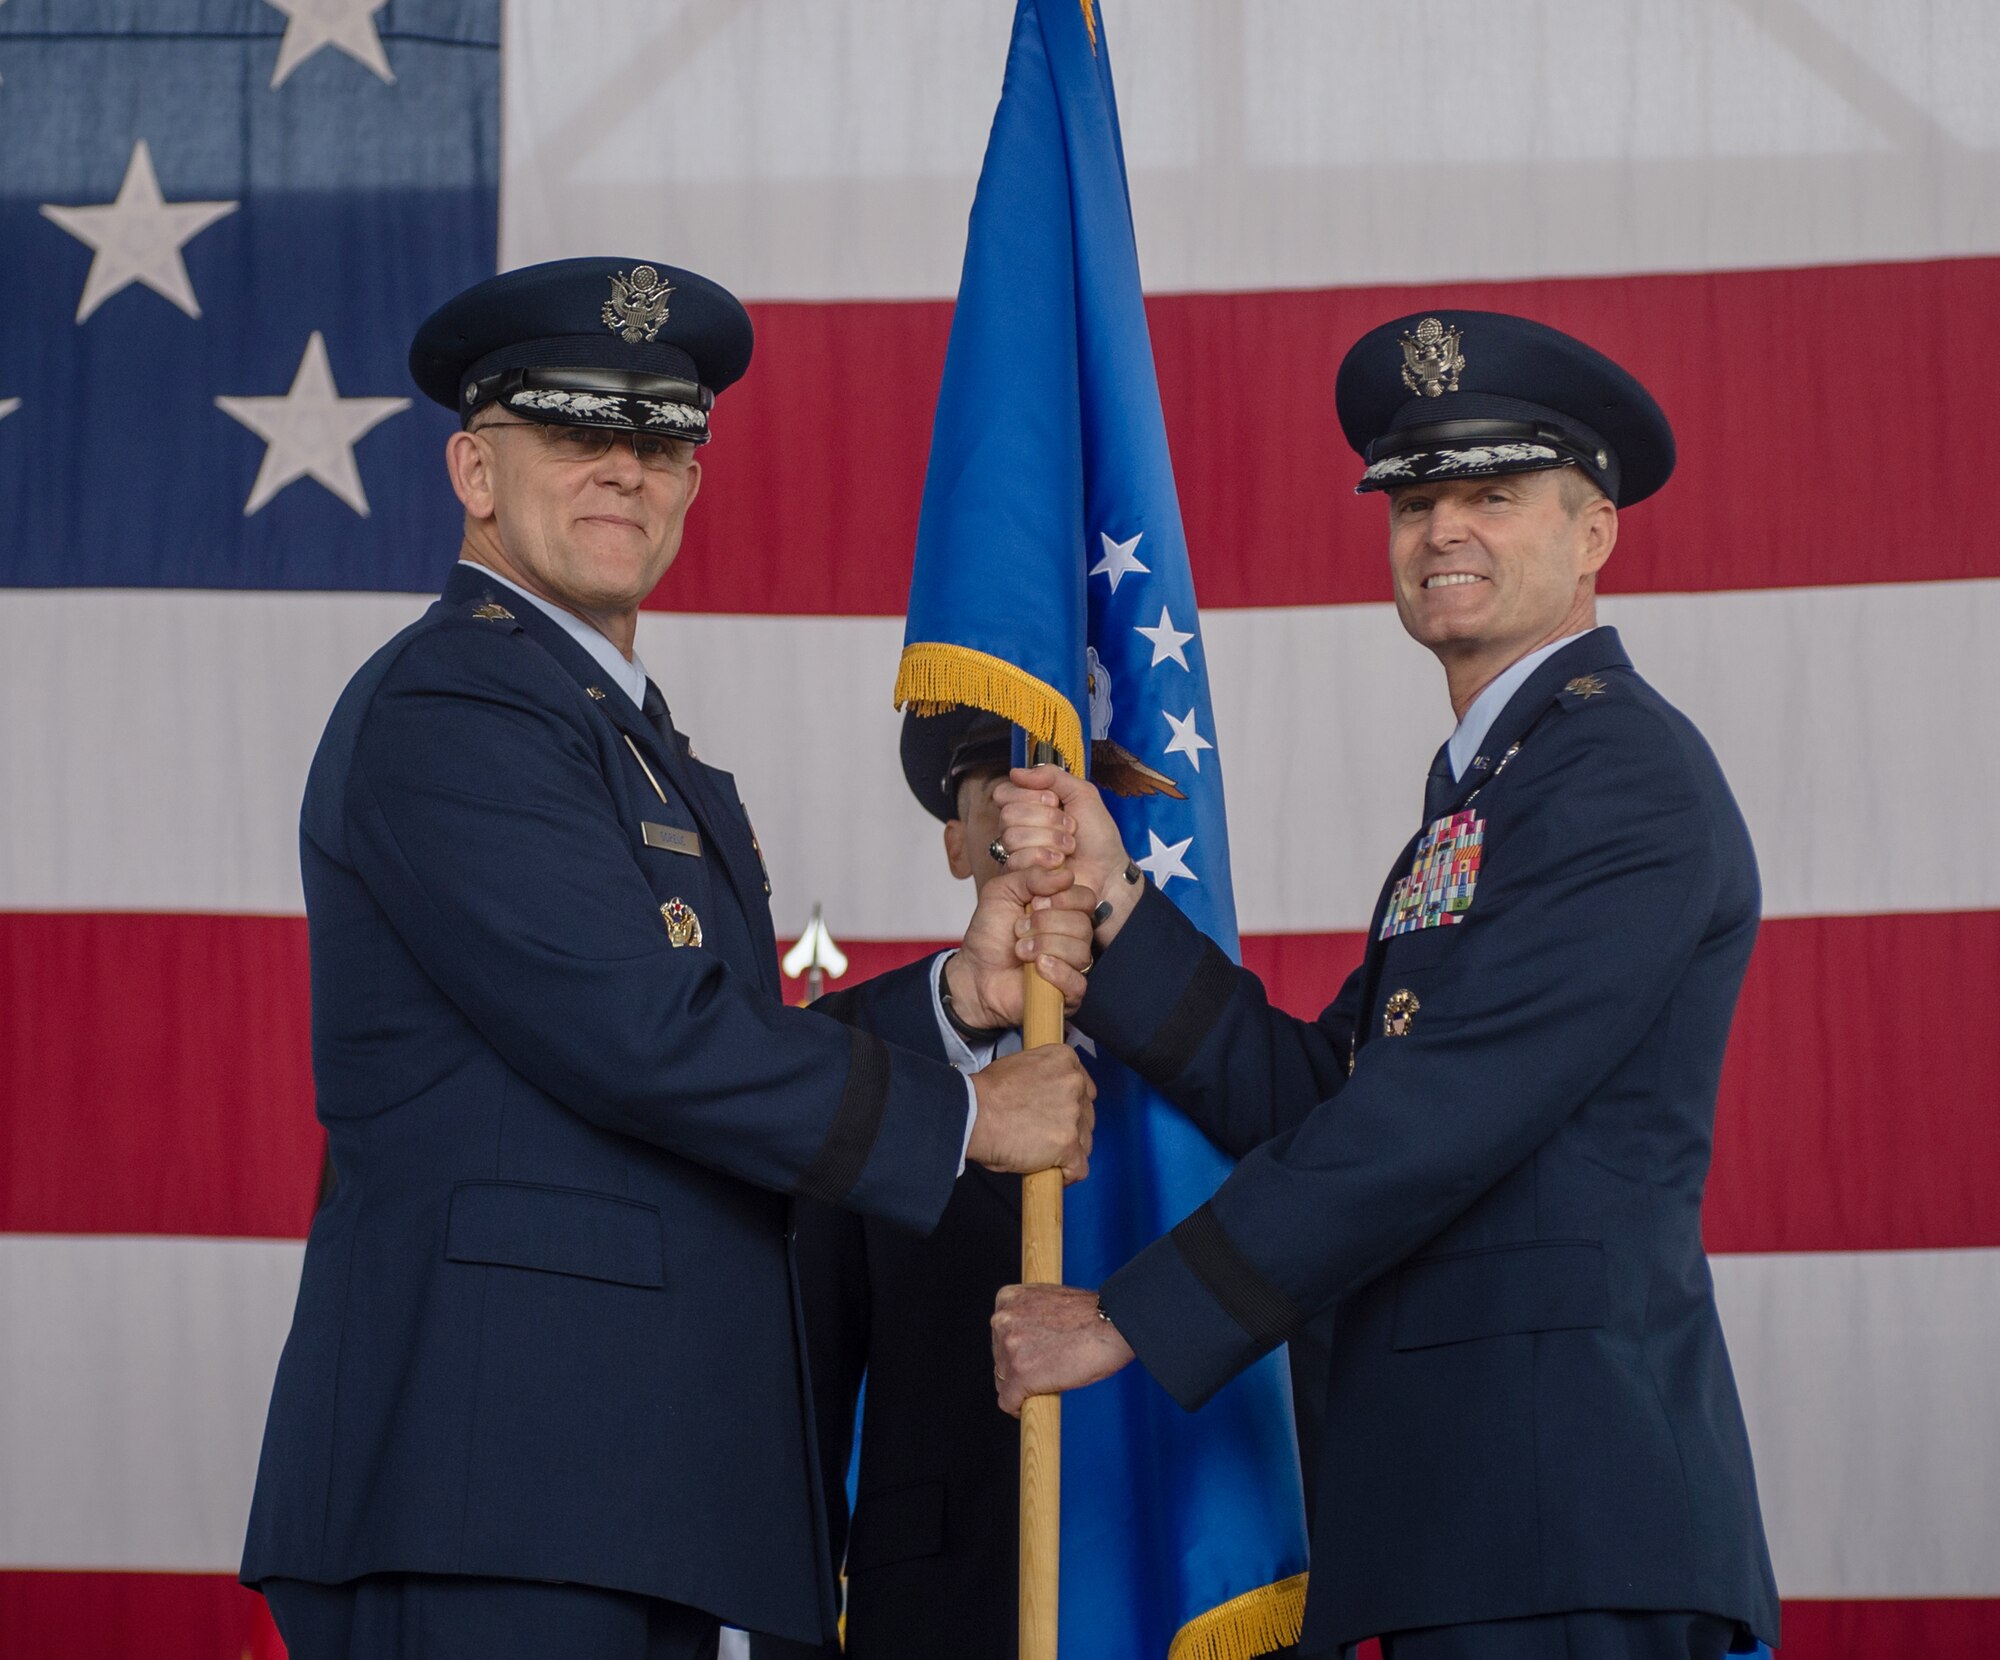 Gen. Frank Gorenc, U.S. Air Forces in Europe and Air Force Africa commander, passes the 3rd Air Force guidon to Lt. Gen. Darryl Roberson, 3rd Air Force commander during an assumption of command ceremony June 11, 2014, Ramstein Air Base, Germany. Roberson comes to 3rd Air Force from his previous assignment as the vice director of operations on the joint staff in Washington, D.C. The command provides full-spectrum Air Force war-fighting capabilities throughout an area of responsibility that spans three continents and encompasses 104 countries.